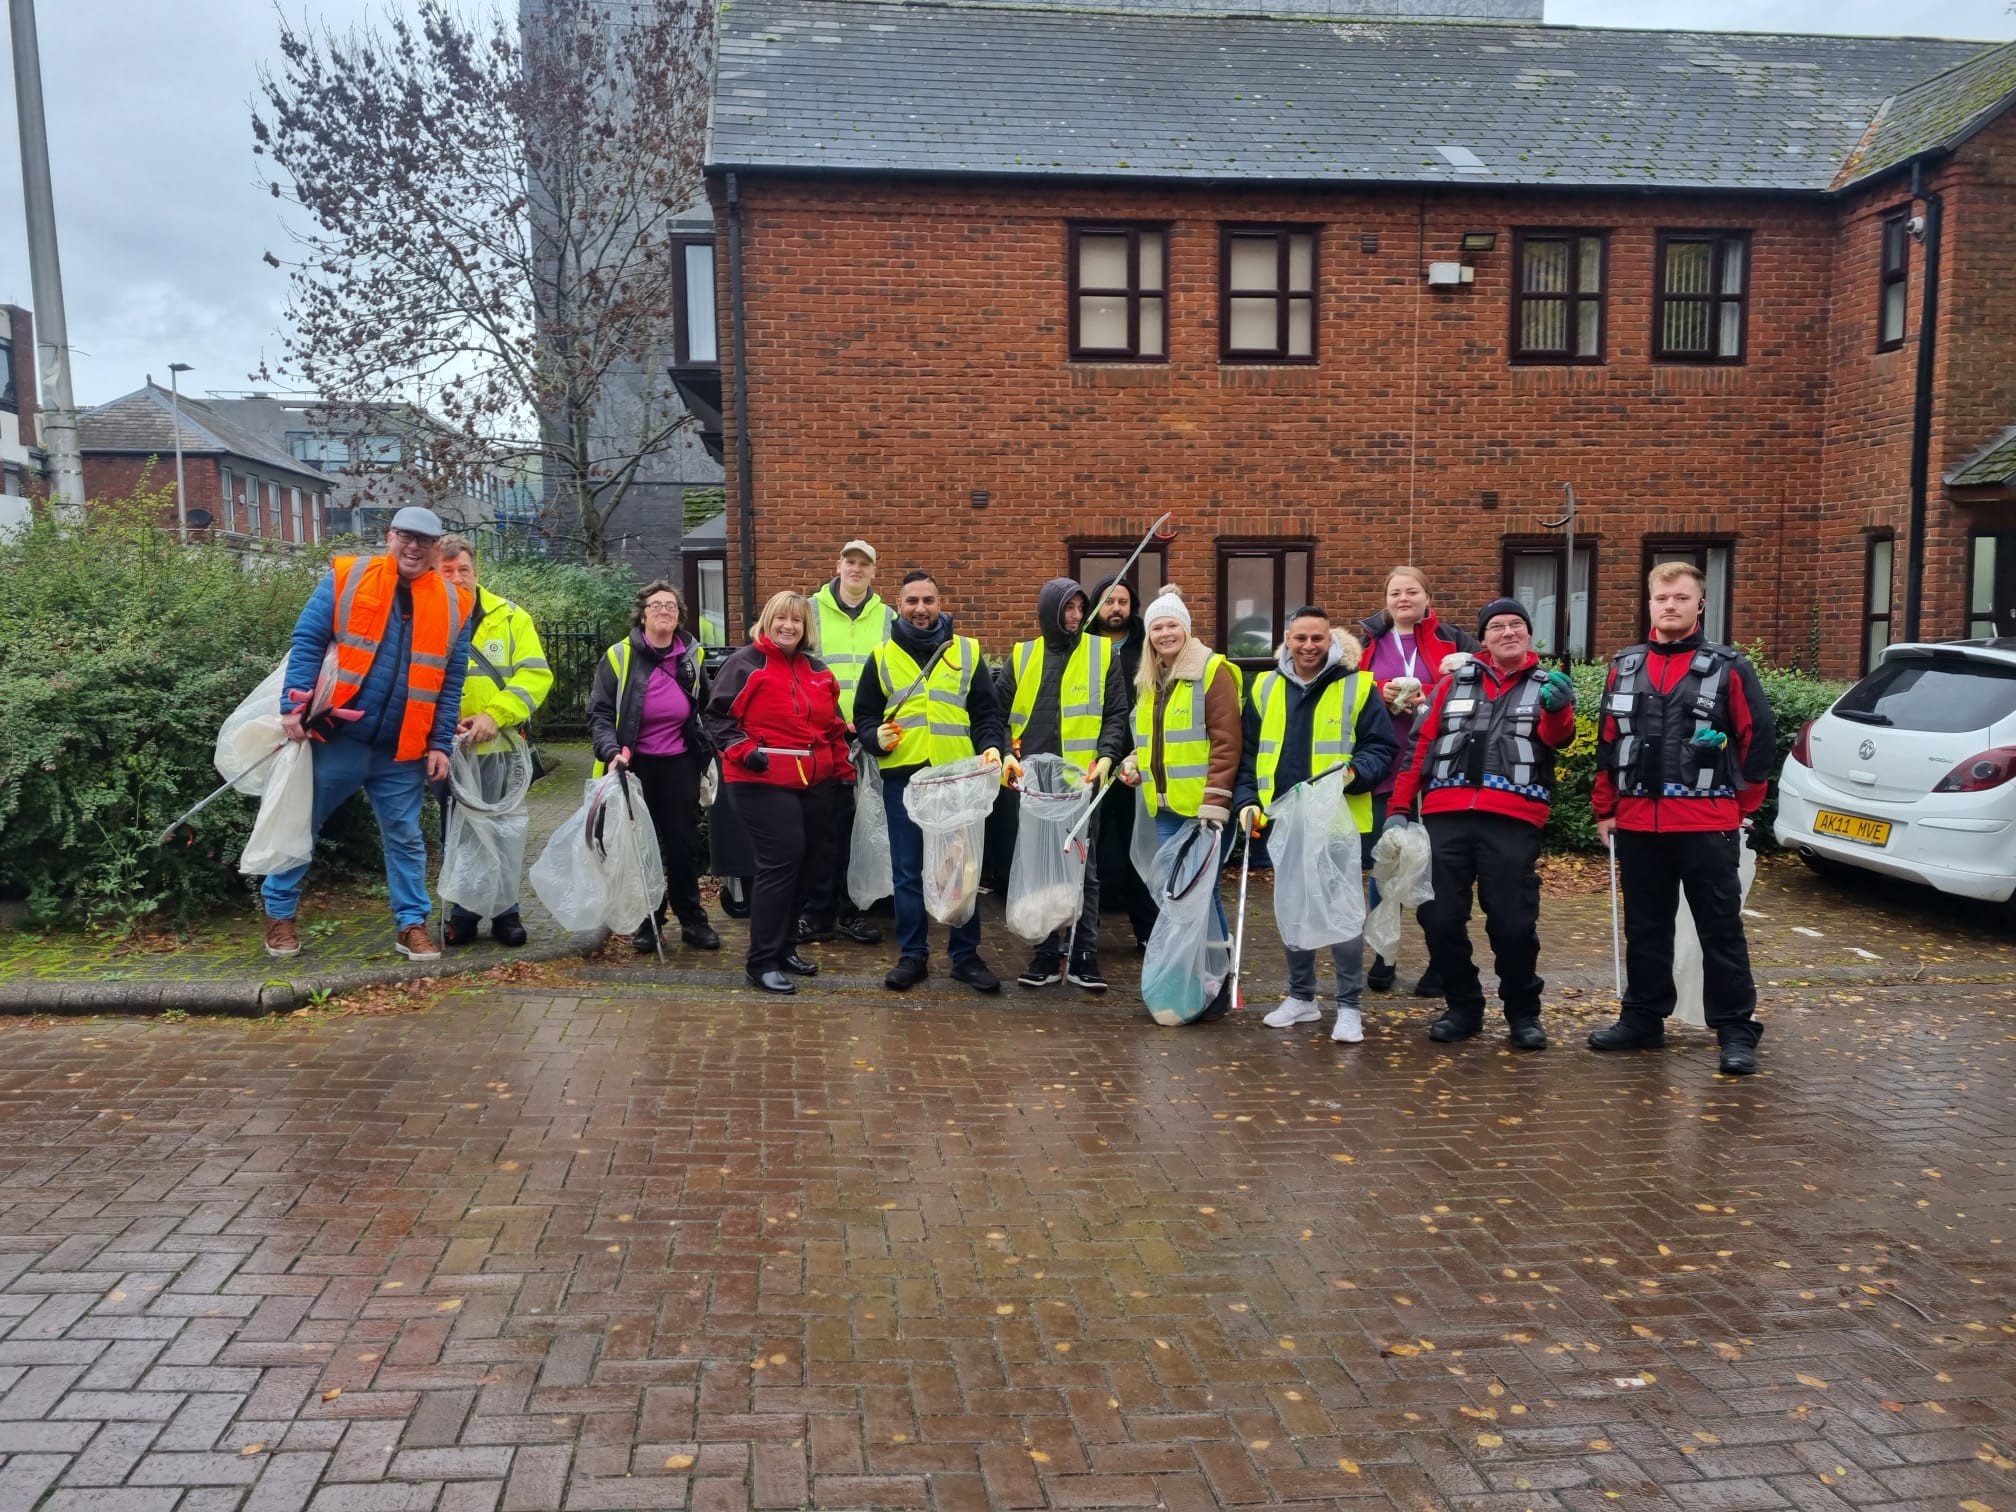 Litterpicking with Litter Watch and Elis (Industrial Loundry Services).